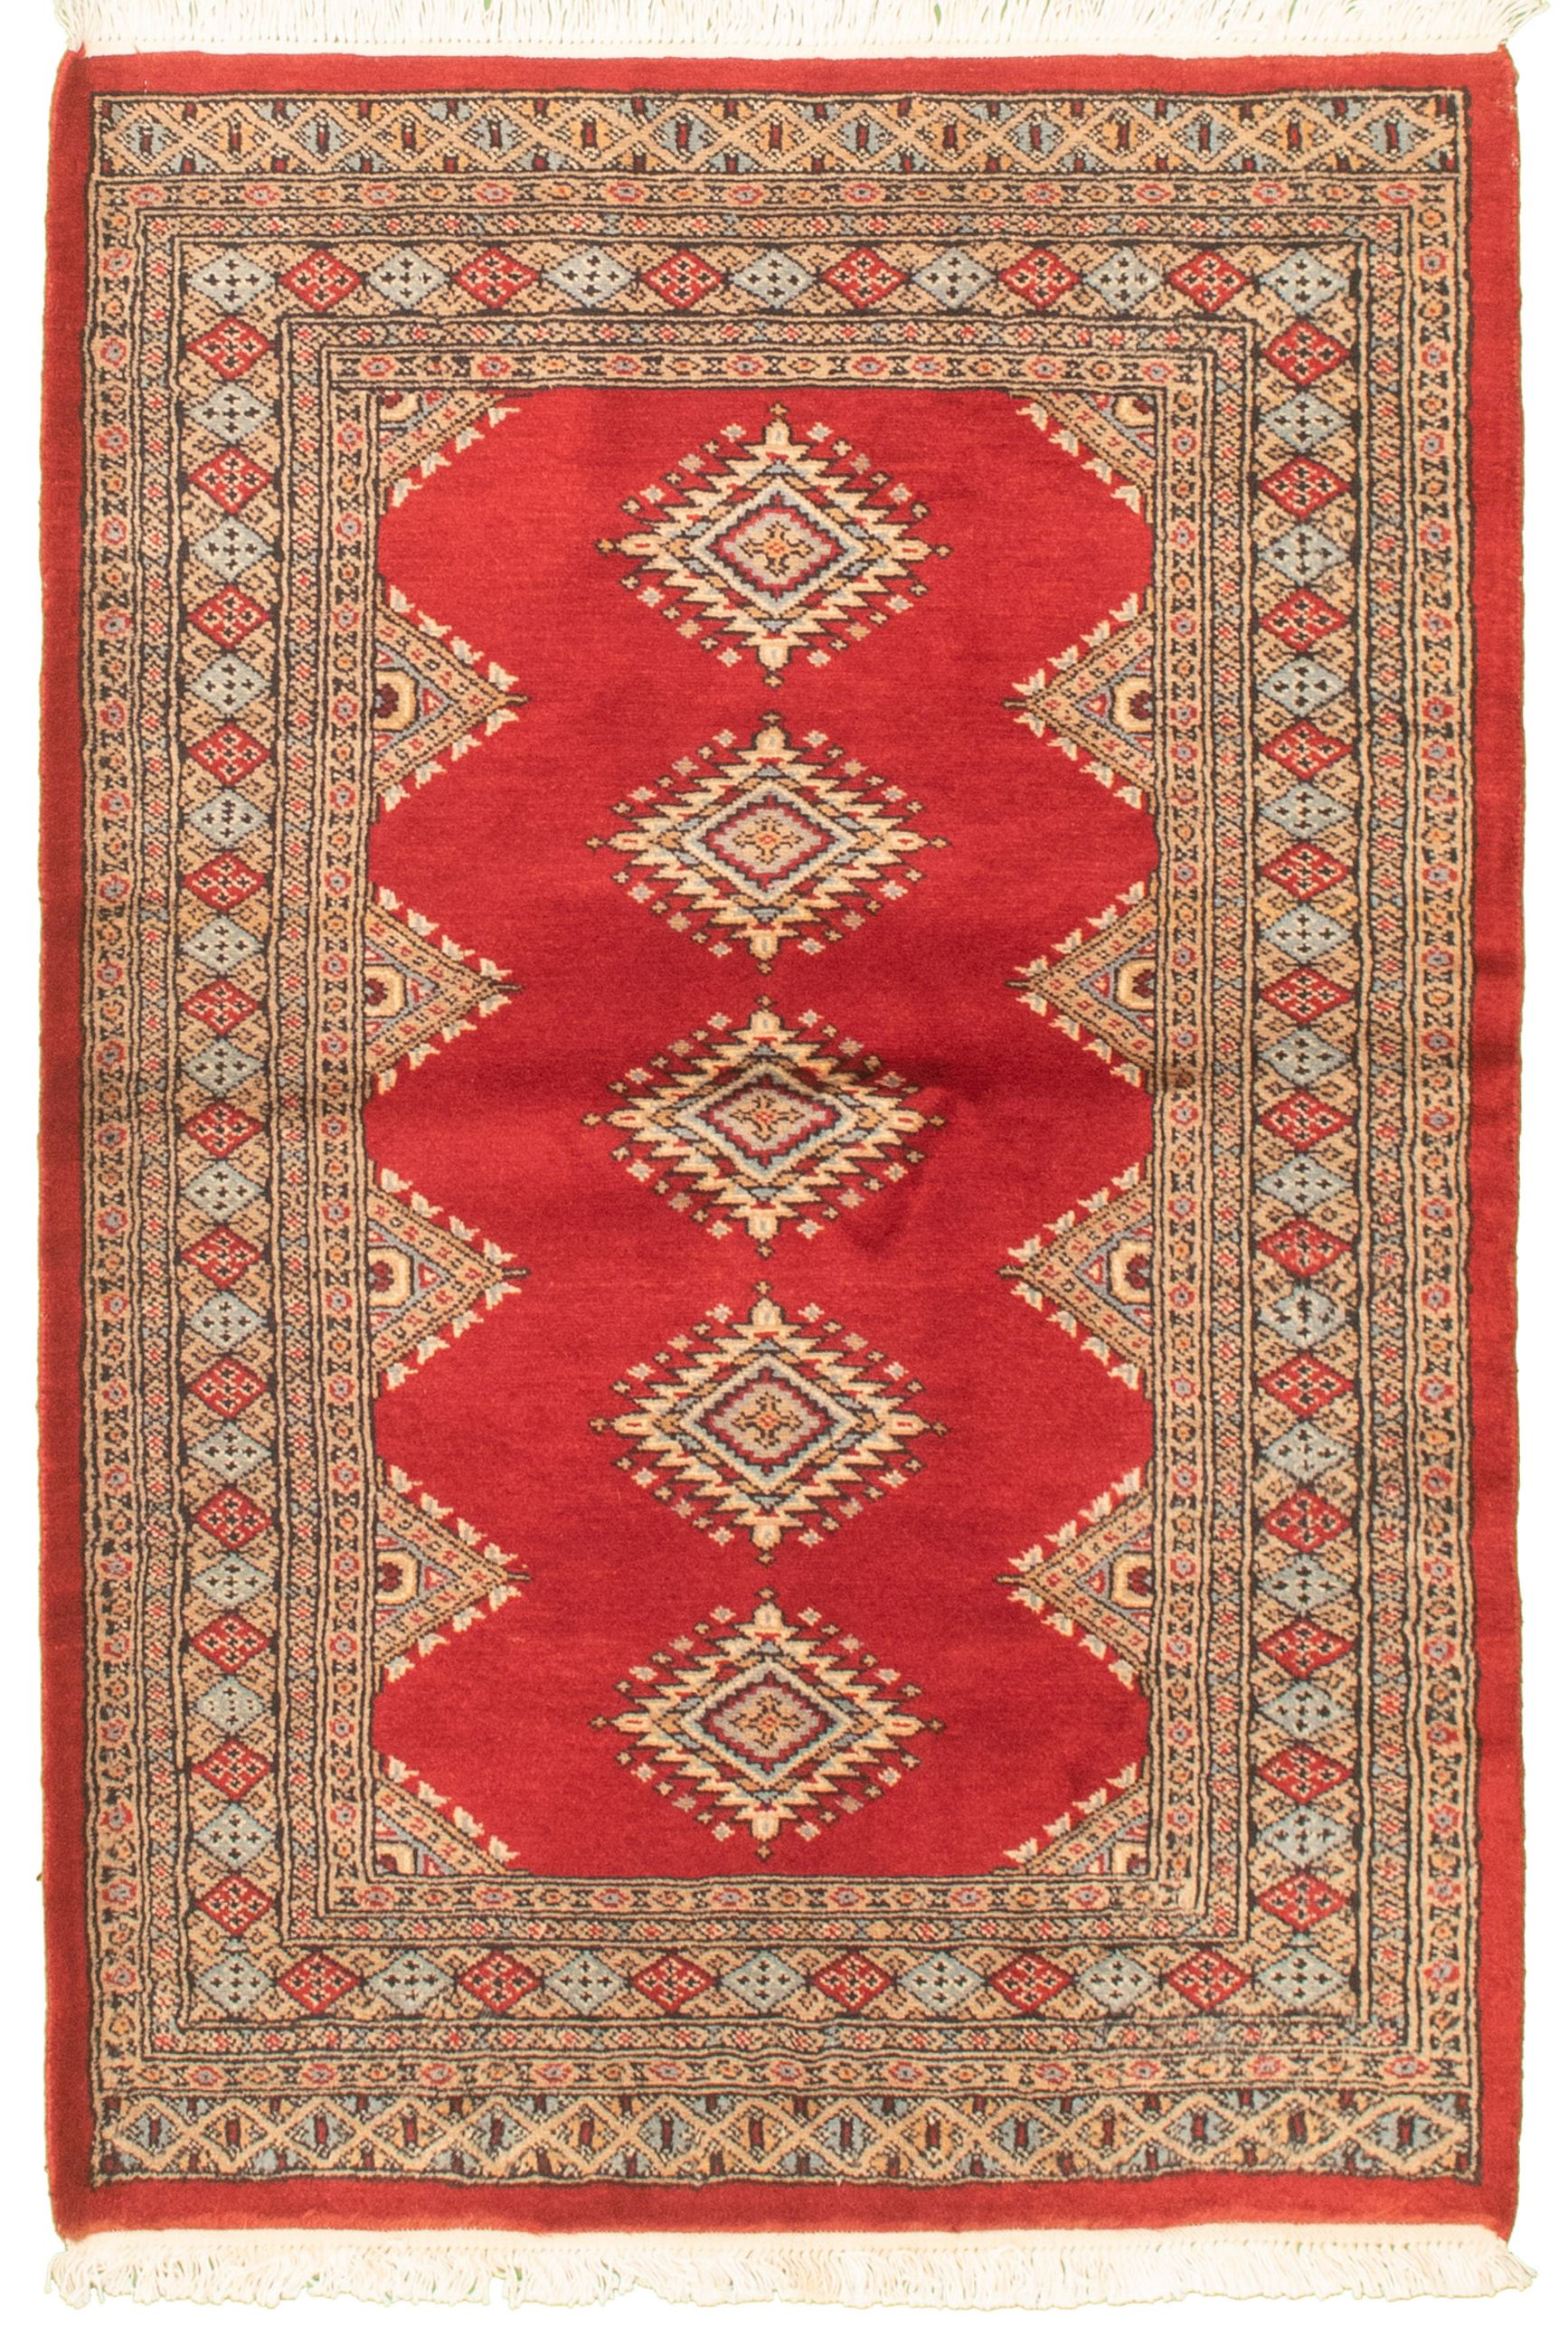 Hand-knotted Finest Peshawar Bokhara Red Wool Rug 3'3" x 5'0"  Size: 3'3" x 5'0"  